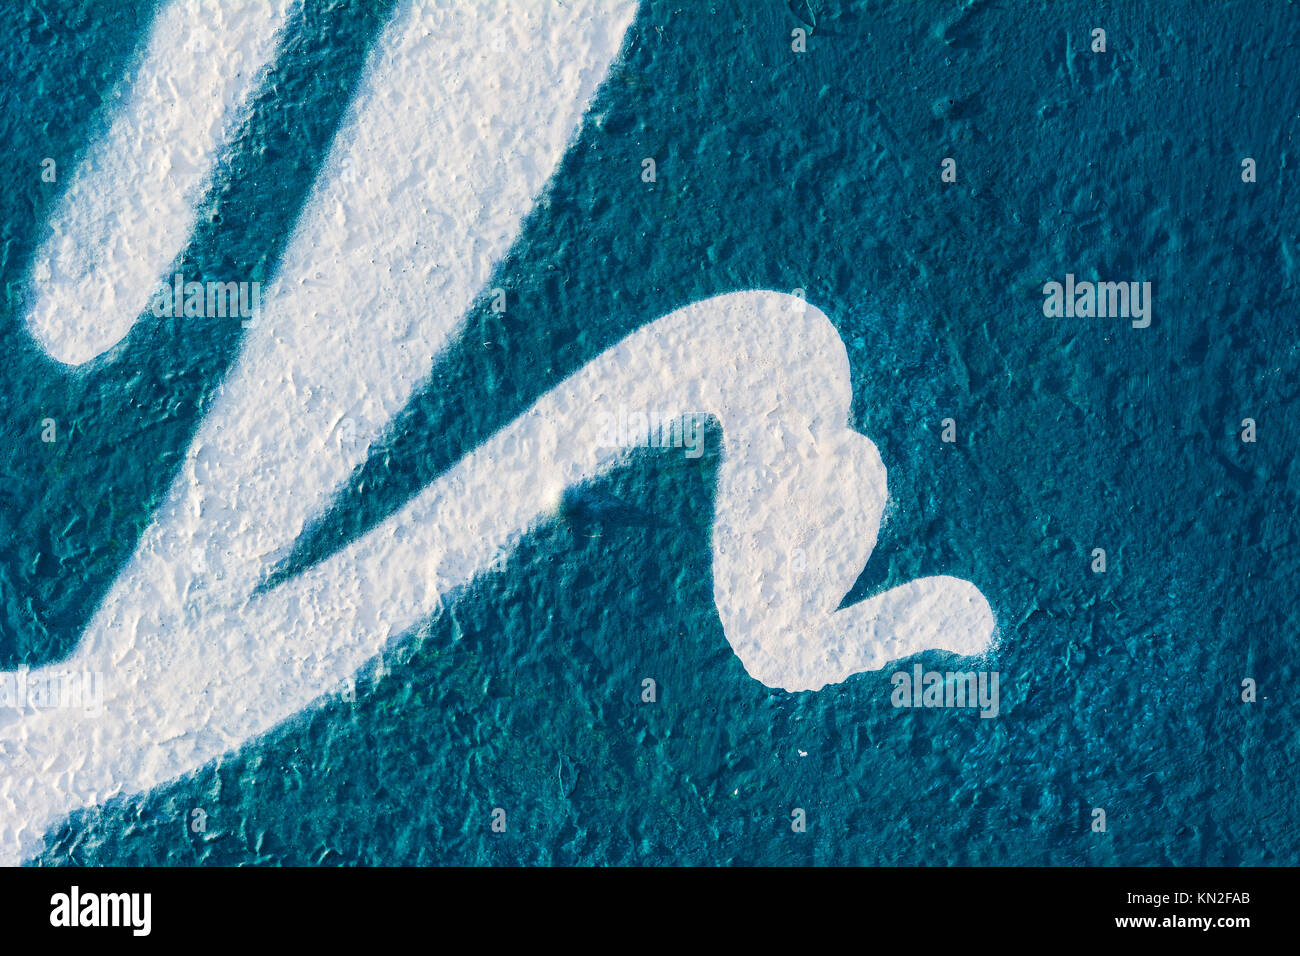 abstract graffiti on rough concrete surface Stock Photo